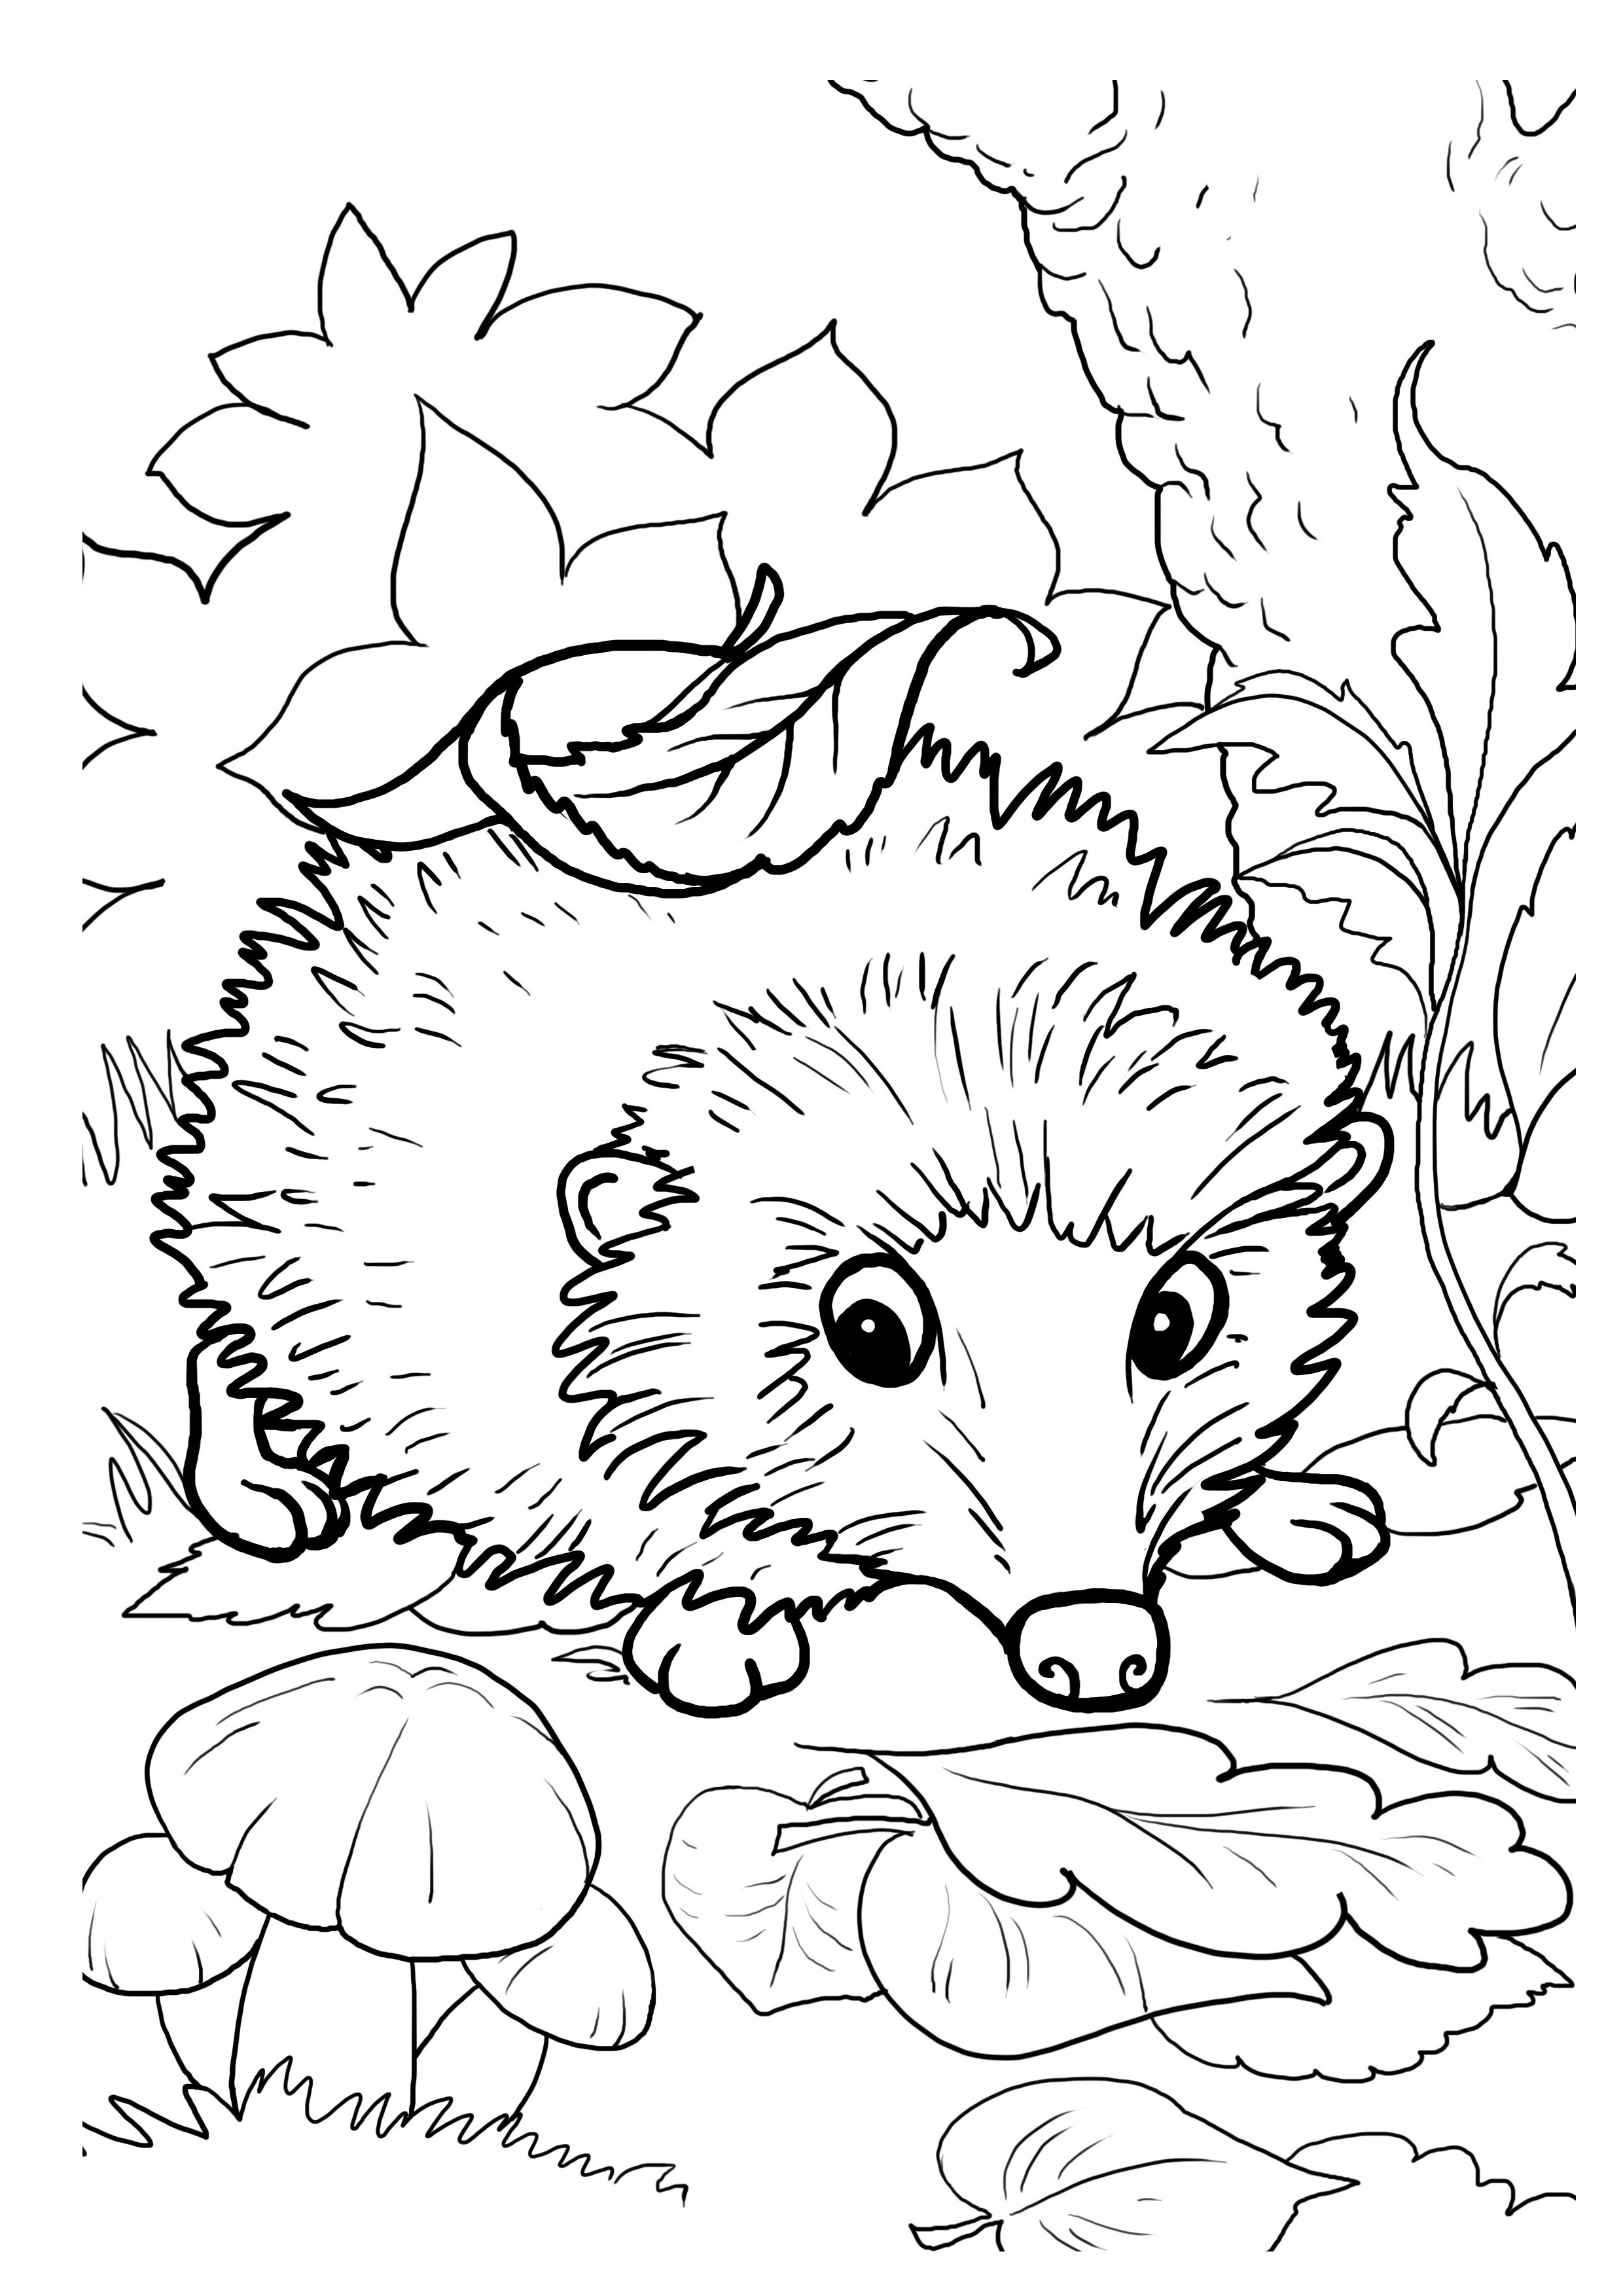 Hedgehogs. Free Printable, Coloring and Activity Page for Kids BuyLapbook